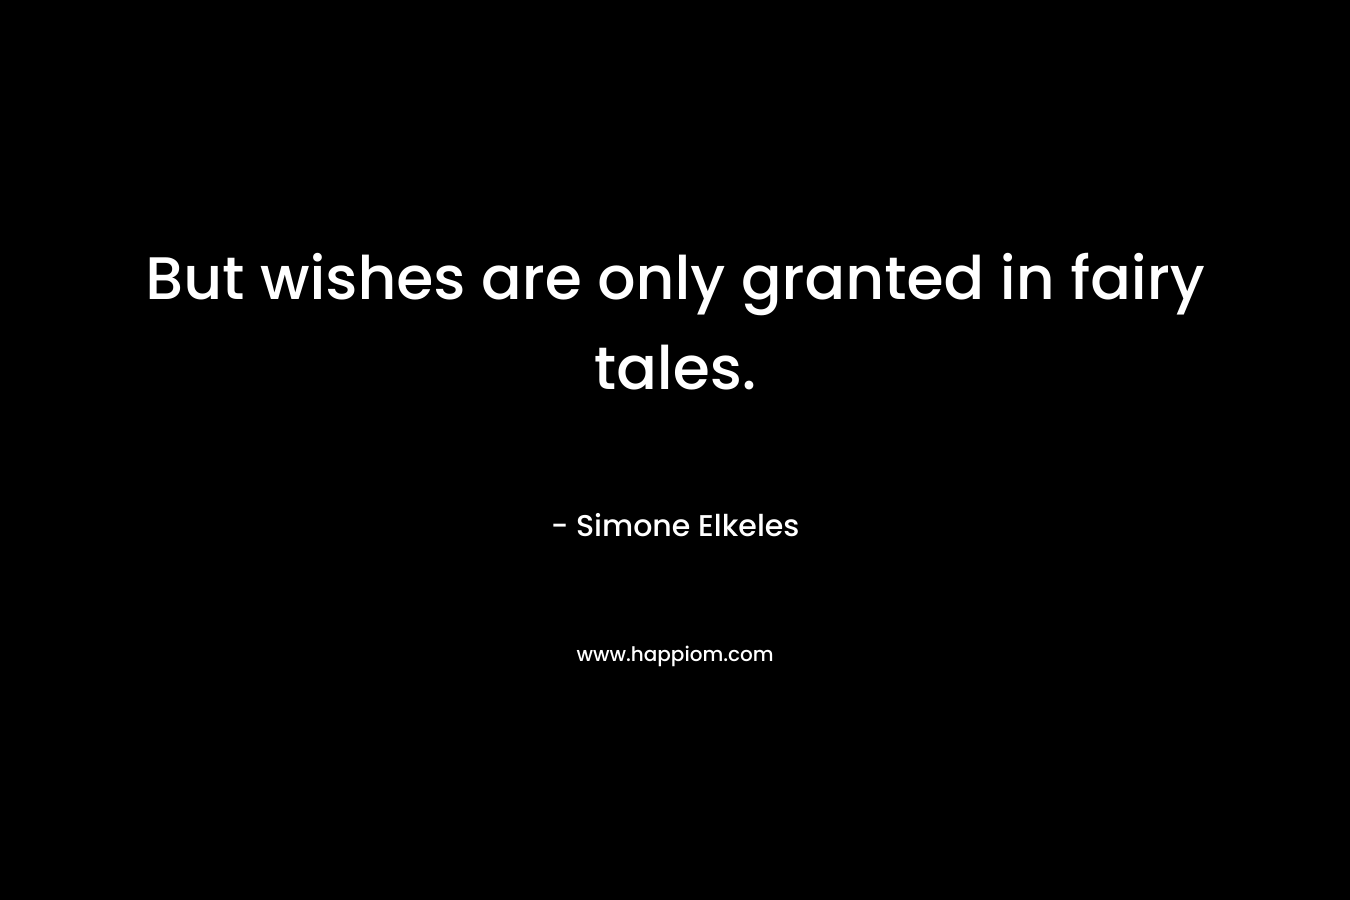 But wishes are only granted in fairy tales. – Simone Elkeles